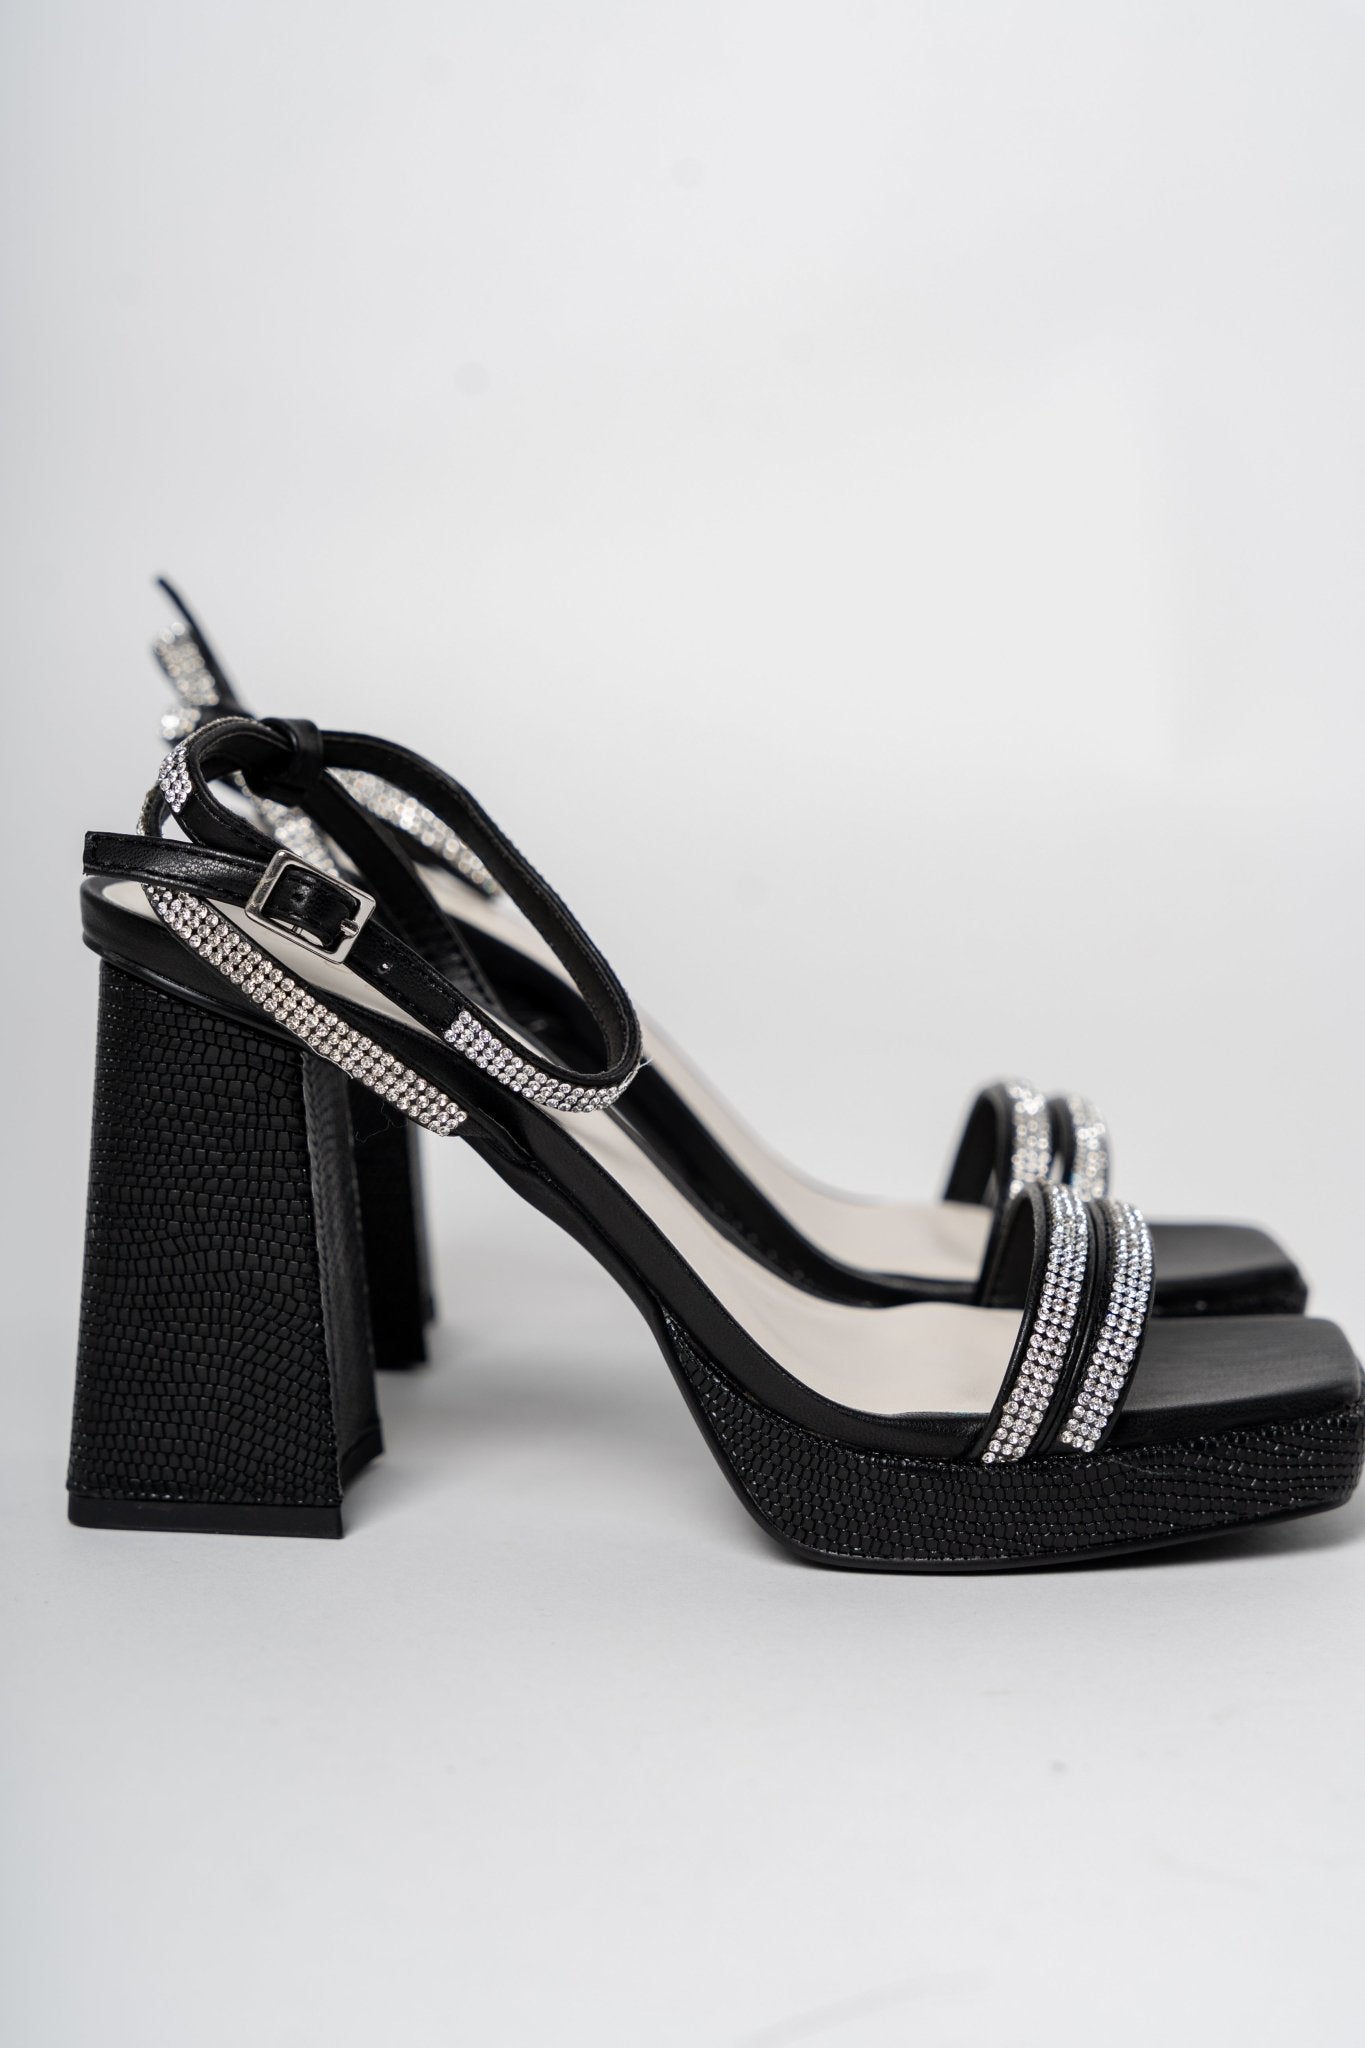 Suva rhinestone strappy heels black - Affordable shoes - Boutique Shoes at Lush Fashion Lounge Boutique in Oklahoma City